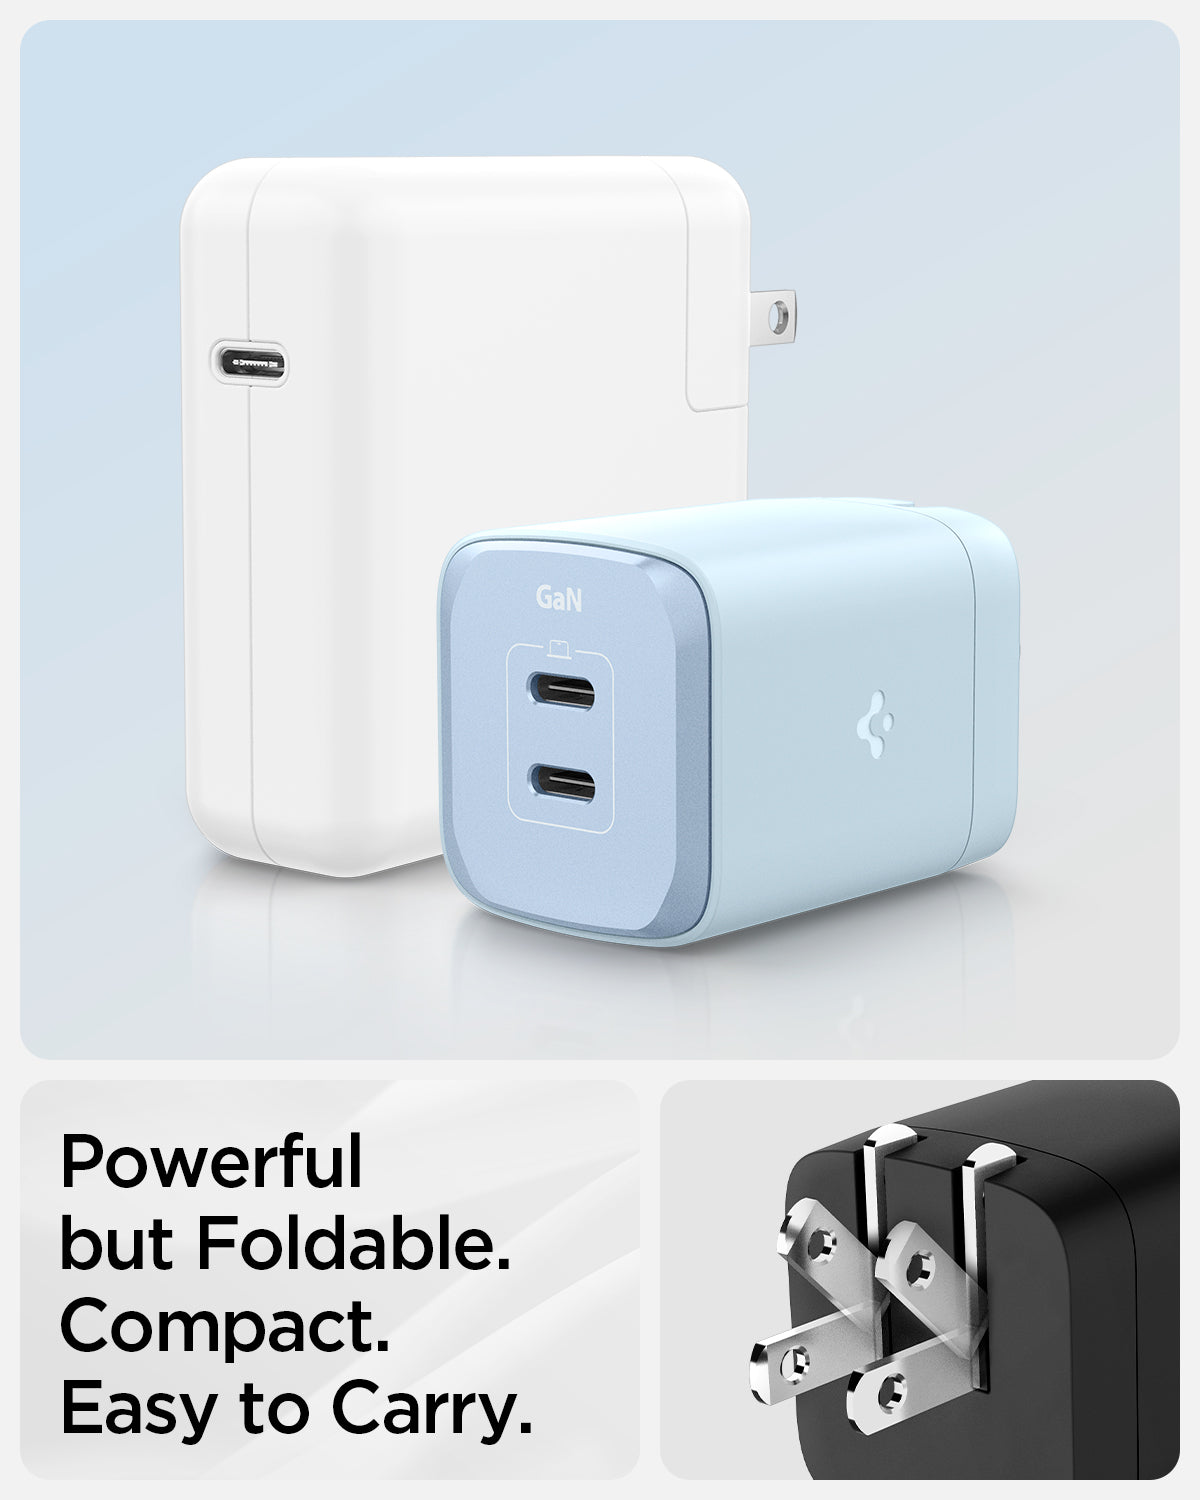 ACH05160 - ArcStation™ Pro GaN 652 Dual USB-C Wall Charger PE2204 in Midnight Black showing Powerful but Foldable. Compact. Easy to Carry, a wall charger with the power connector in folding motion, a light blue wall charger above and beside it is a white charger in usb c-type 